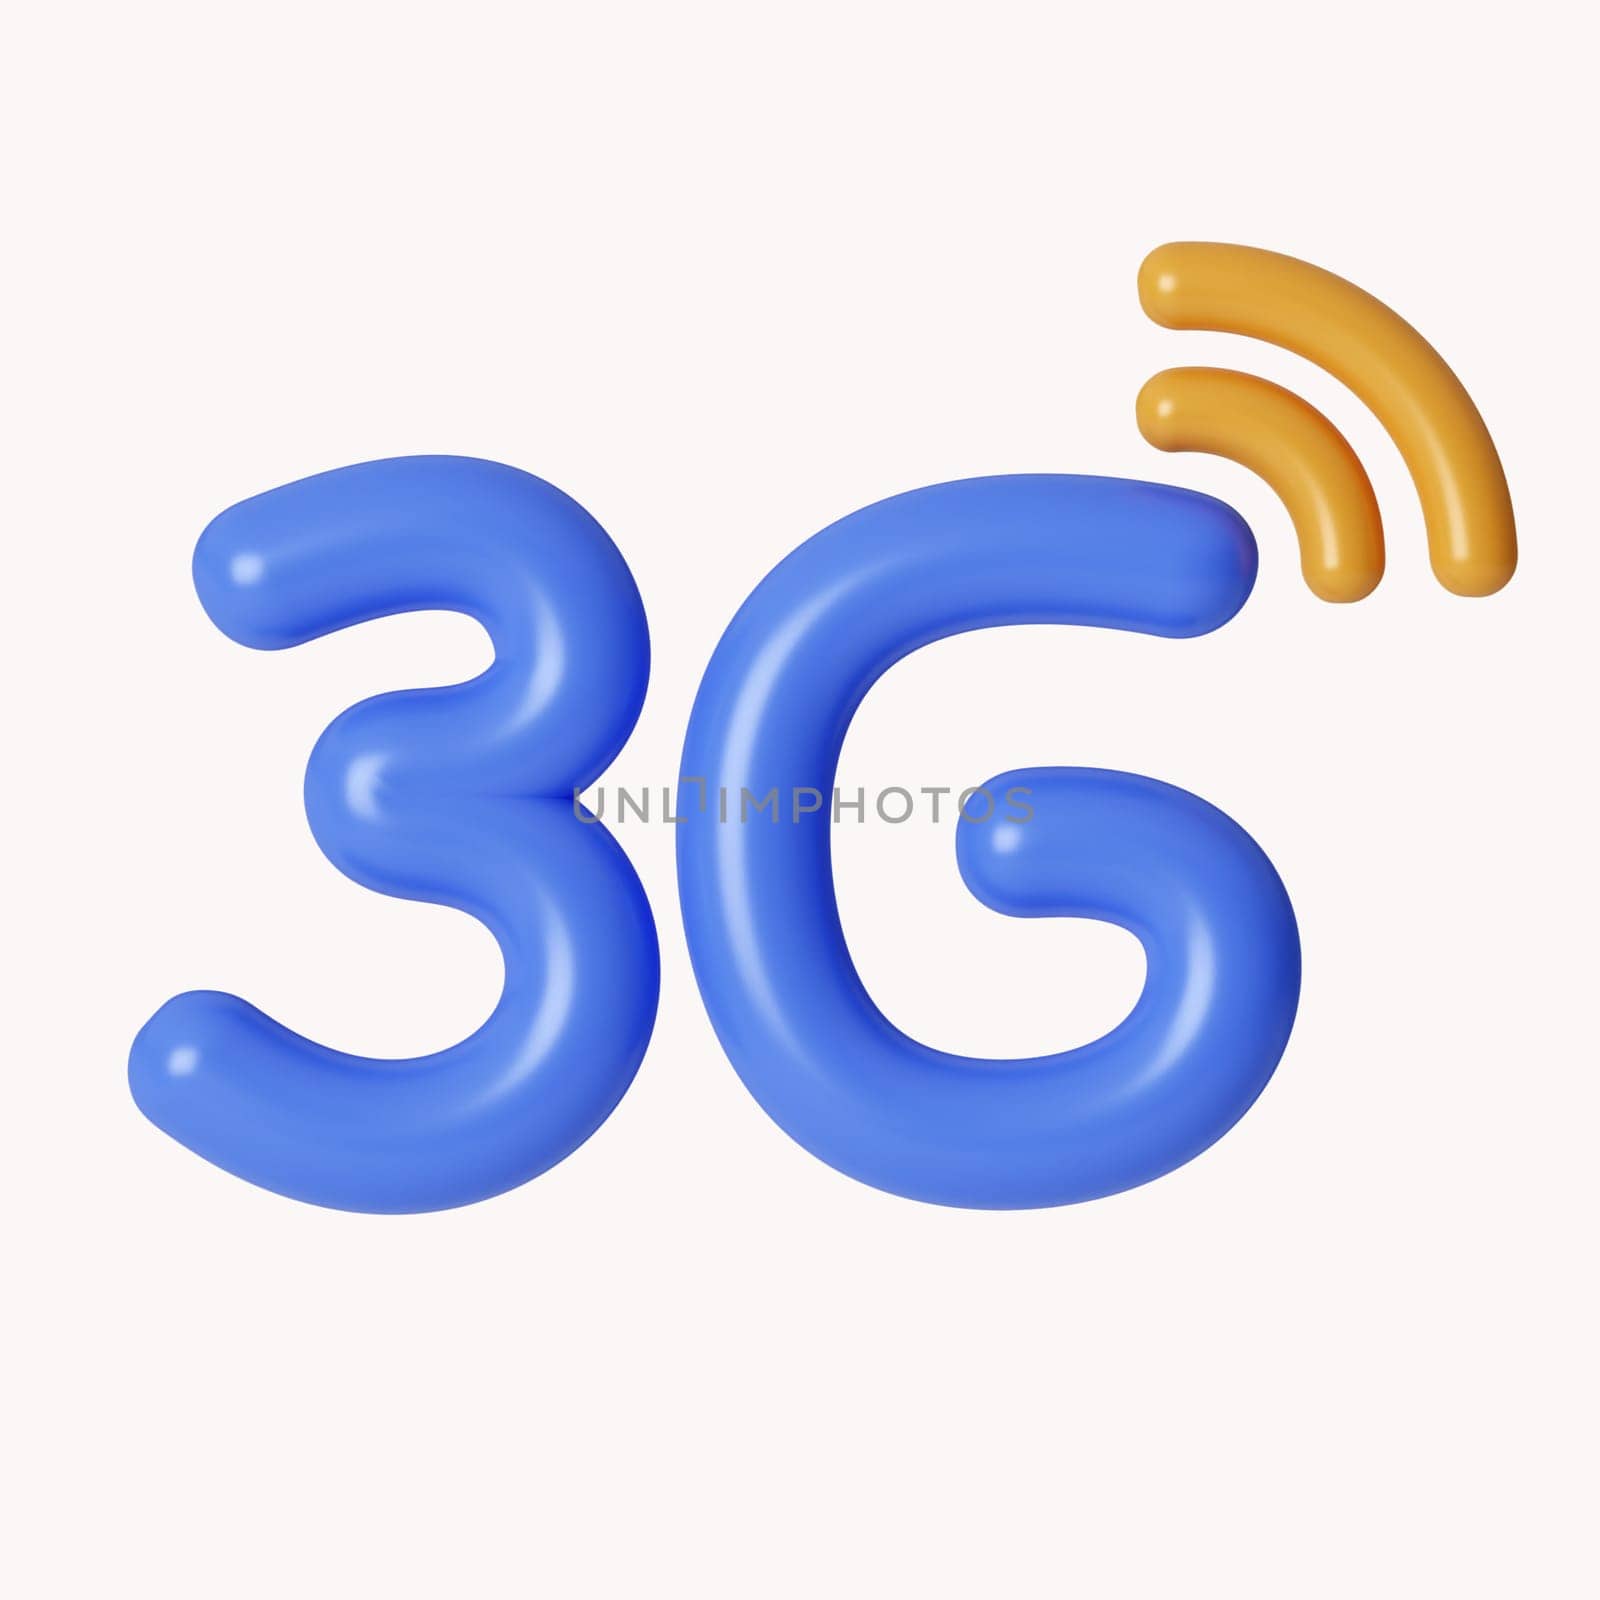 3d 3G icon for web design. Internet network concept. Communication, internet concept. icon isolated on white background. 3d rendering illustration. Clipping path..